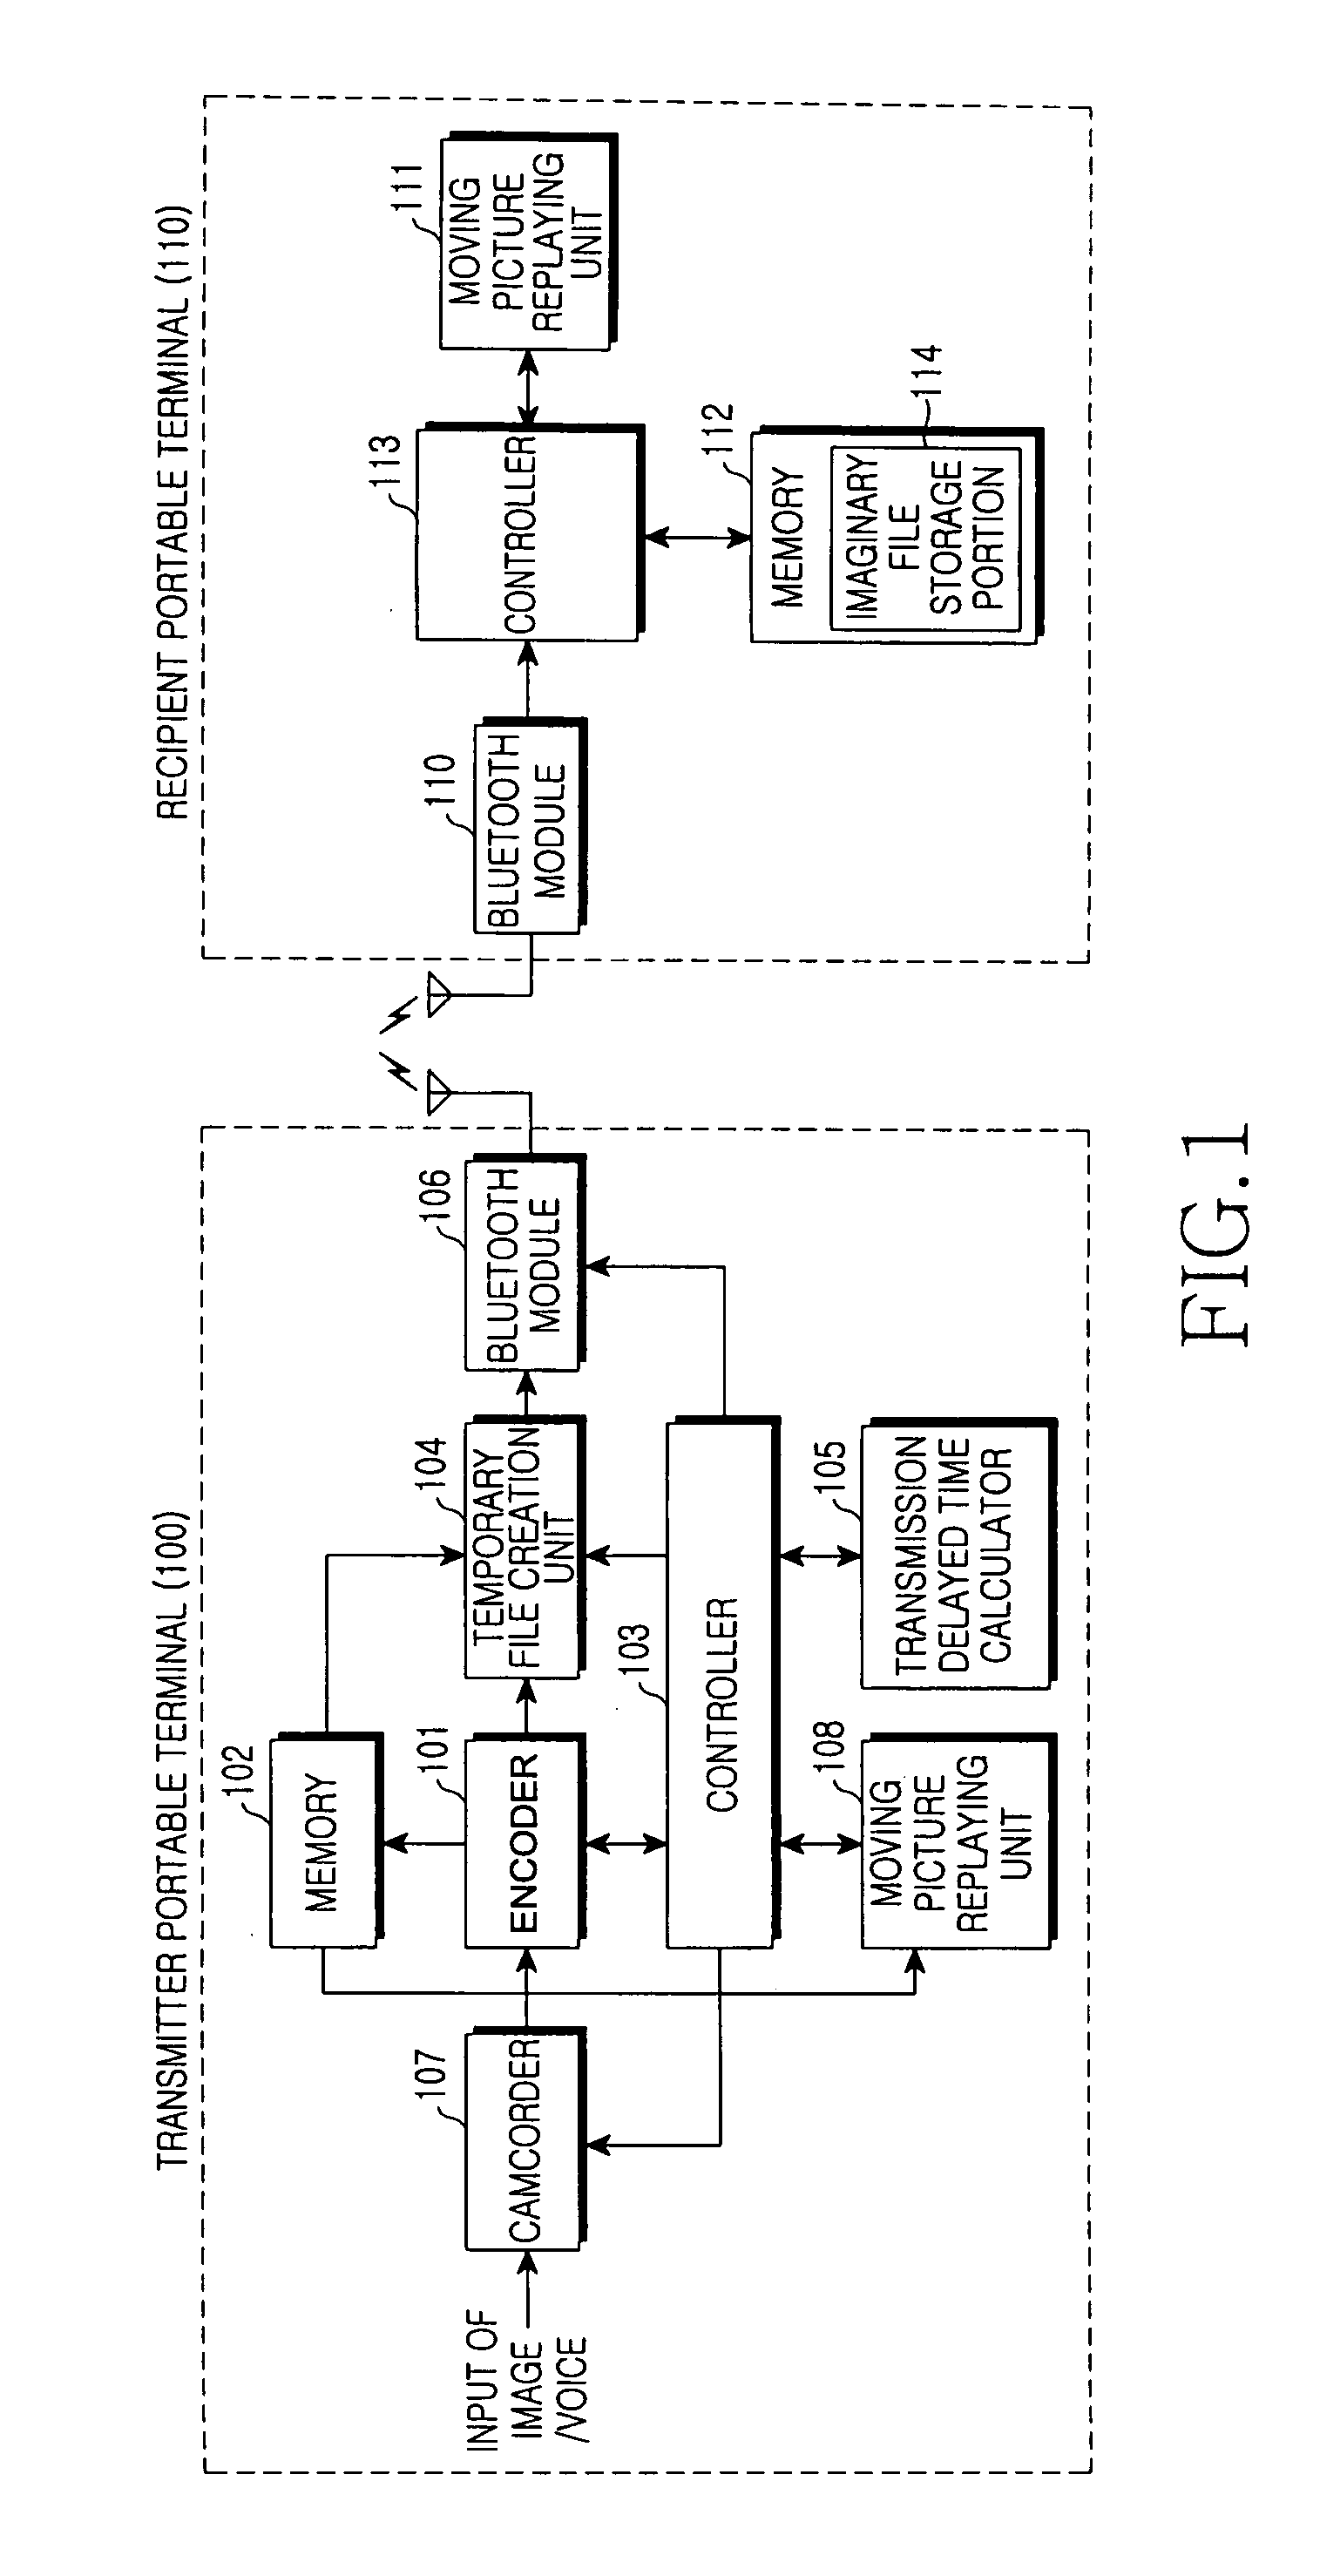 Apparatus and method for transmitting and receiving moving pictures using near field communication